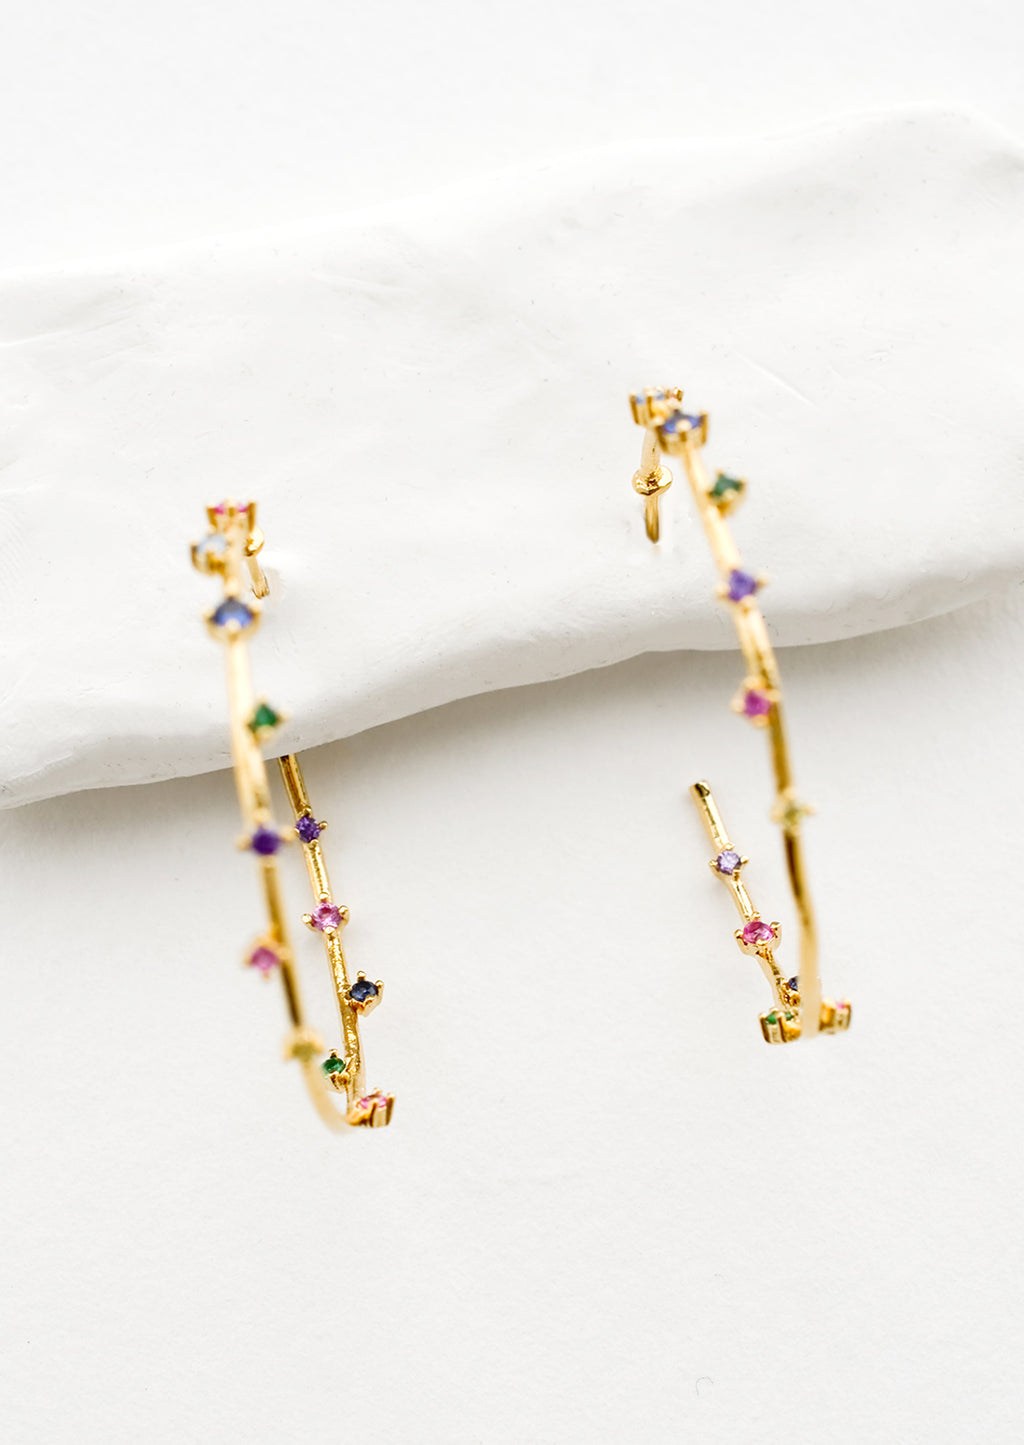 4: A pair of gold hoop earrings with colored crystals wrapping around the hoop sporadically.